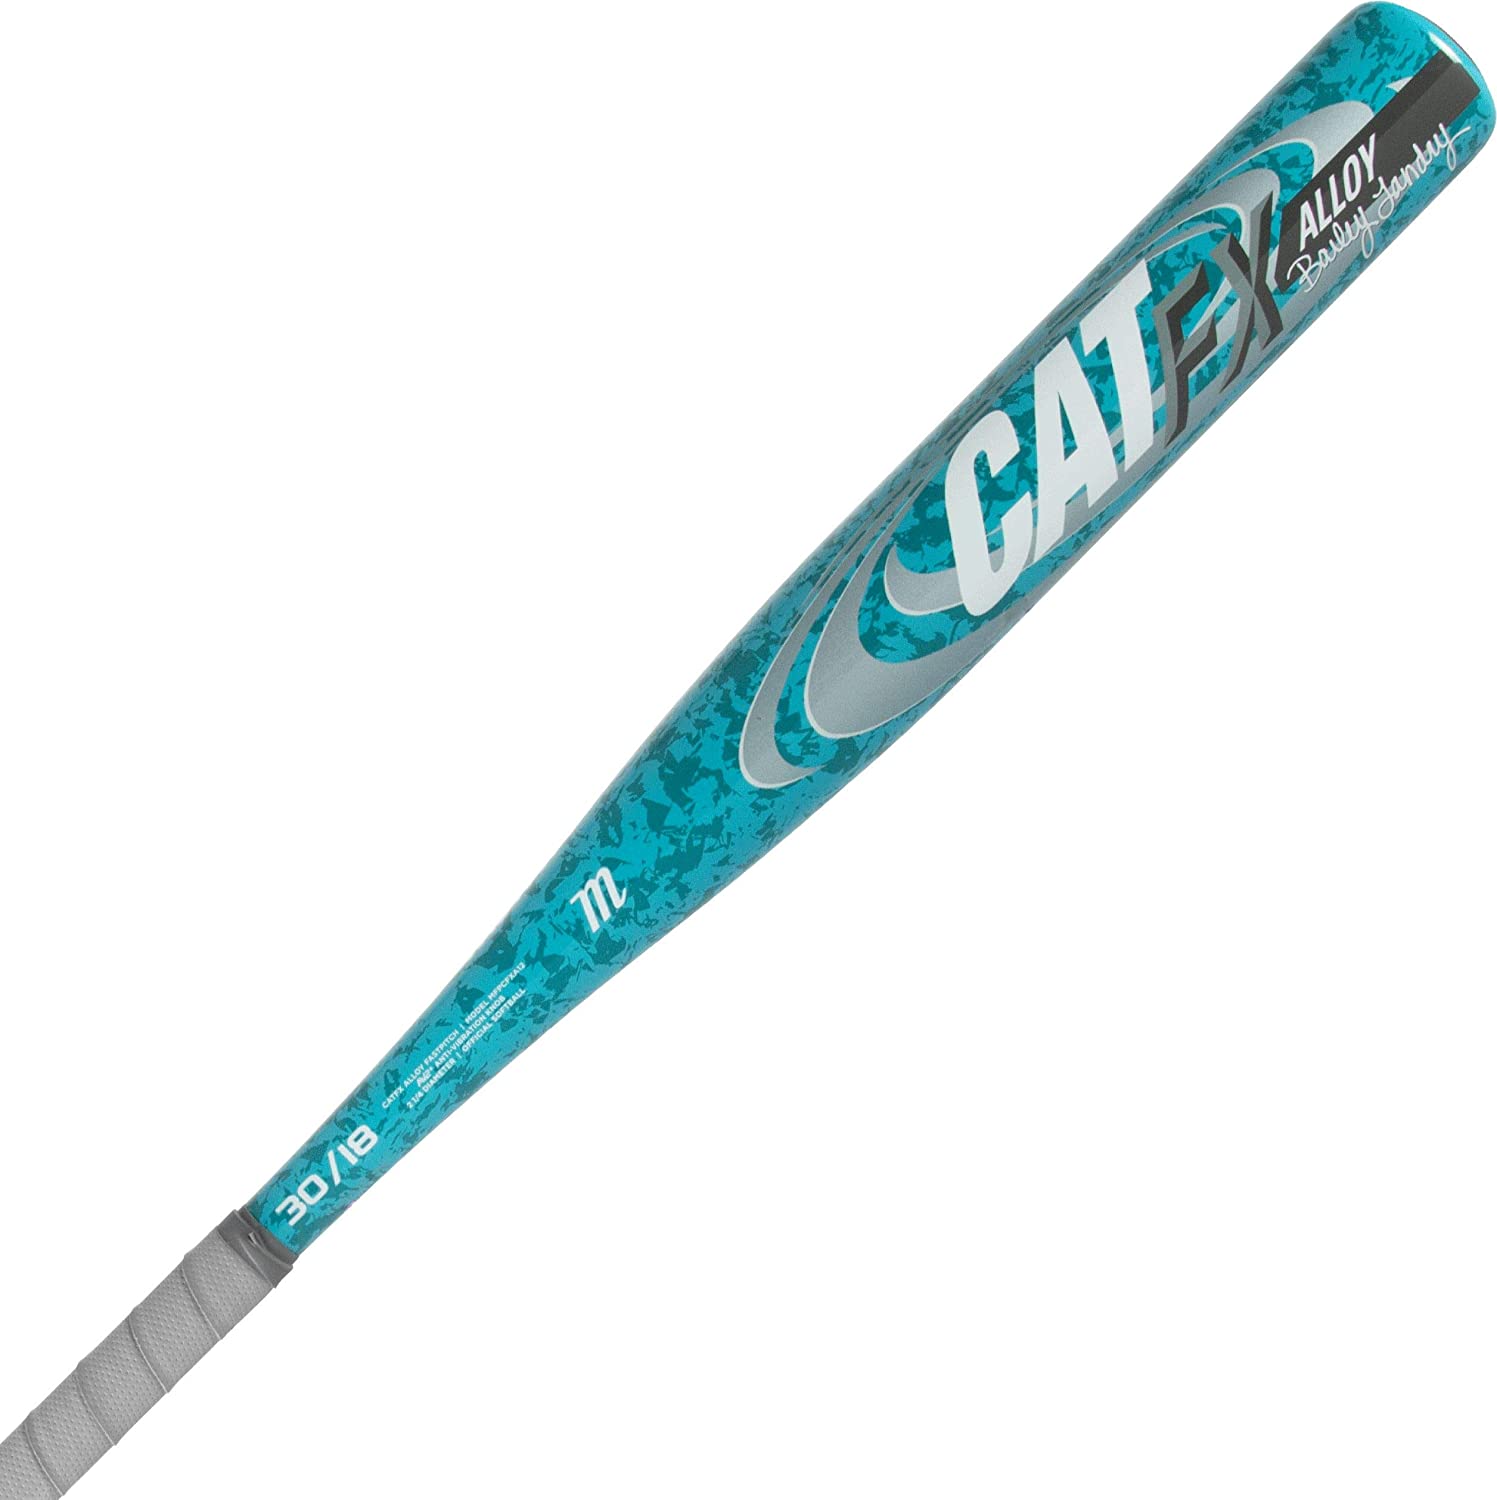 marucci-sports-bl26-cat-fx-alloy-fastpitch-softball-bat-12-bailey-landry-30-inch-18-oz MFPCFXA12-3018 Marucci  One-piece alloy construction provides a clean consistent traditional swing 2nd Generation